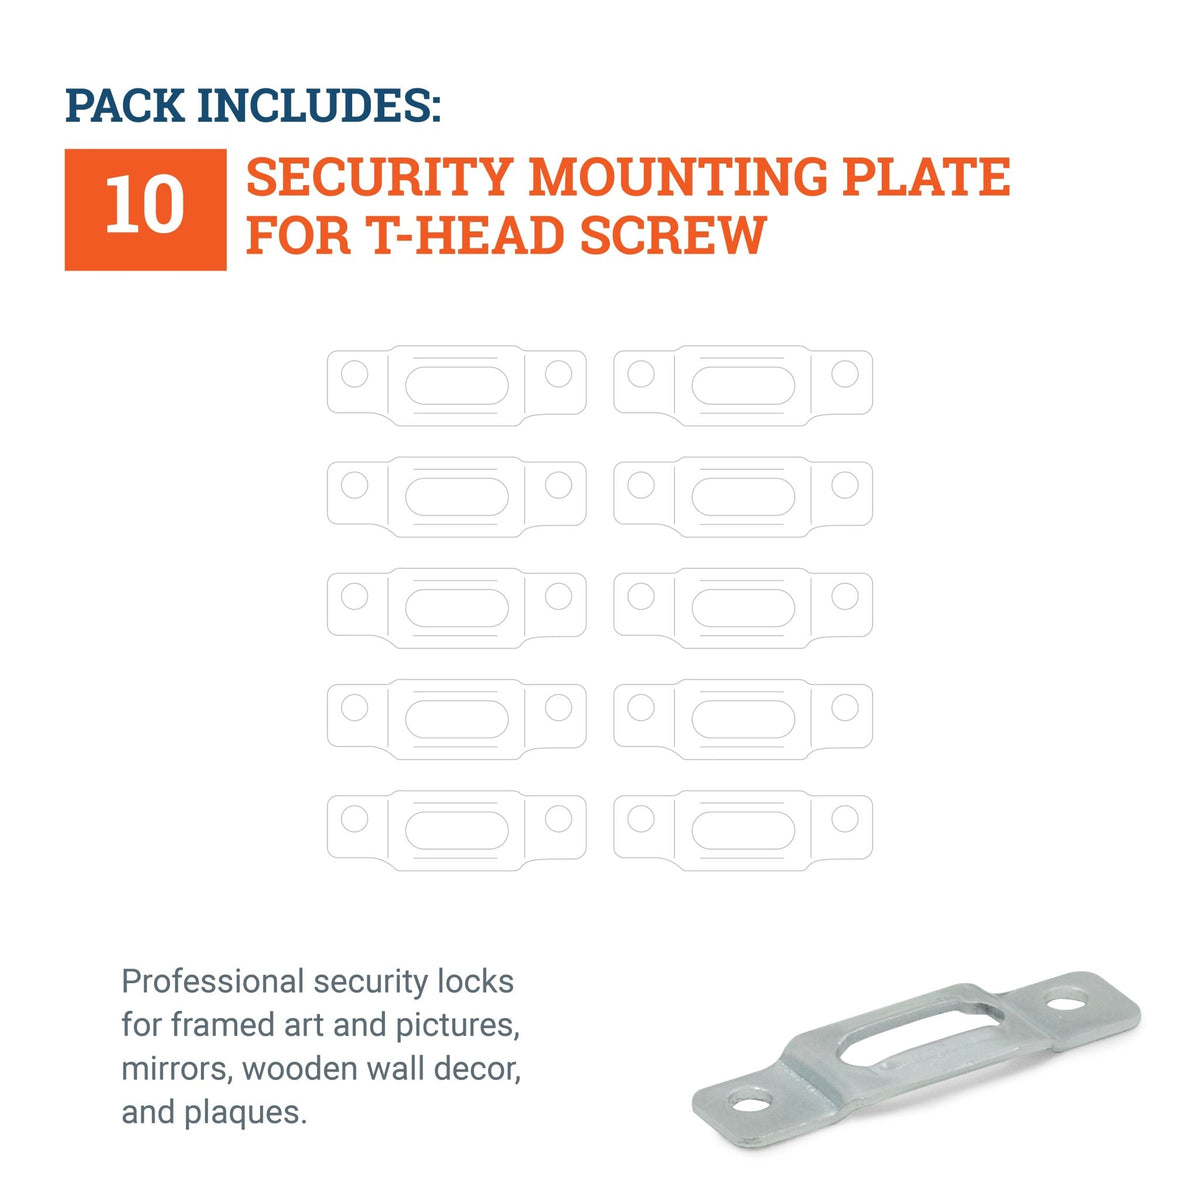 Security Mounting Plate for T-Head Screw - SEC-14X1 - Picture Hang Solutions